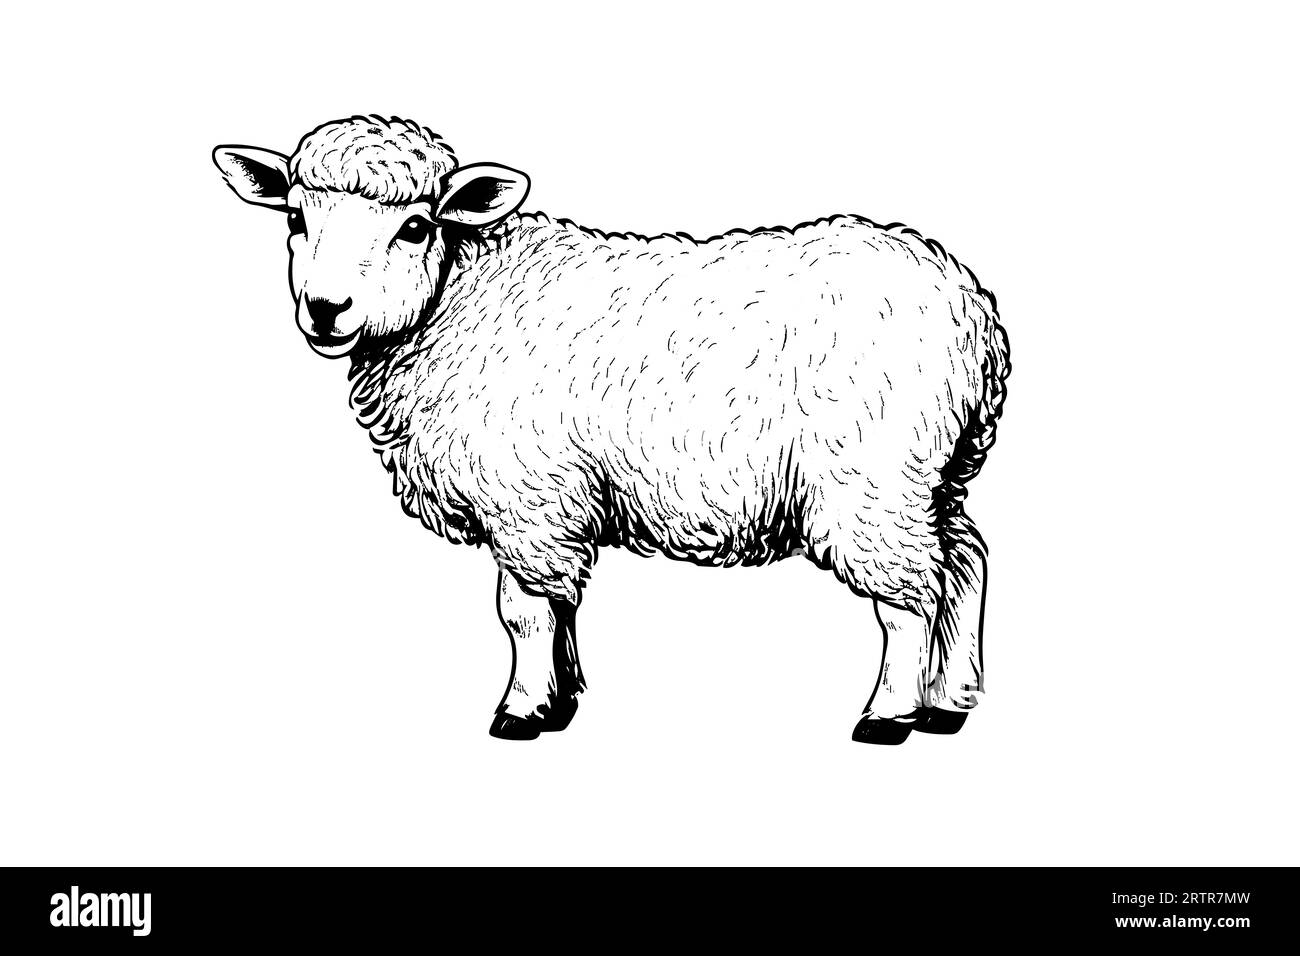 Cute sheep or lamb engraving style vector illustration. Realistic image. Stock Vector